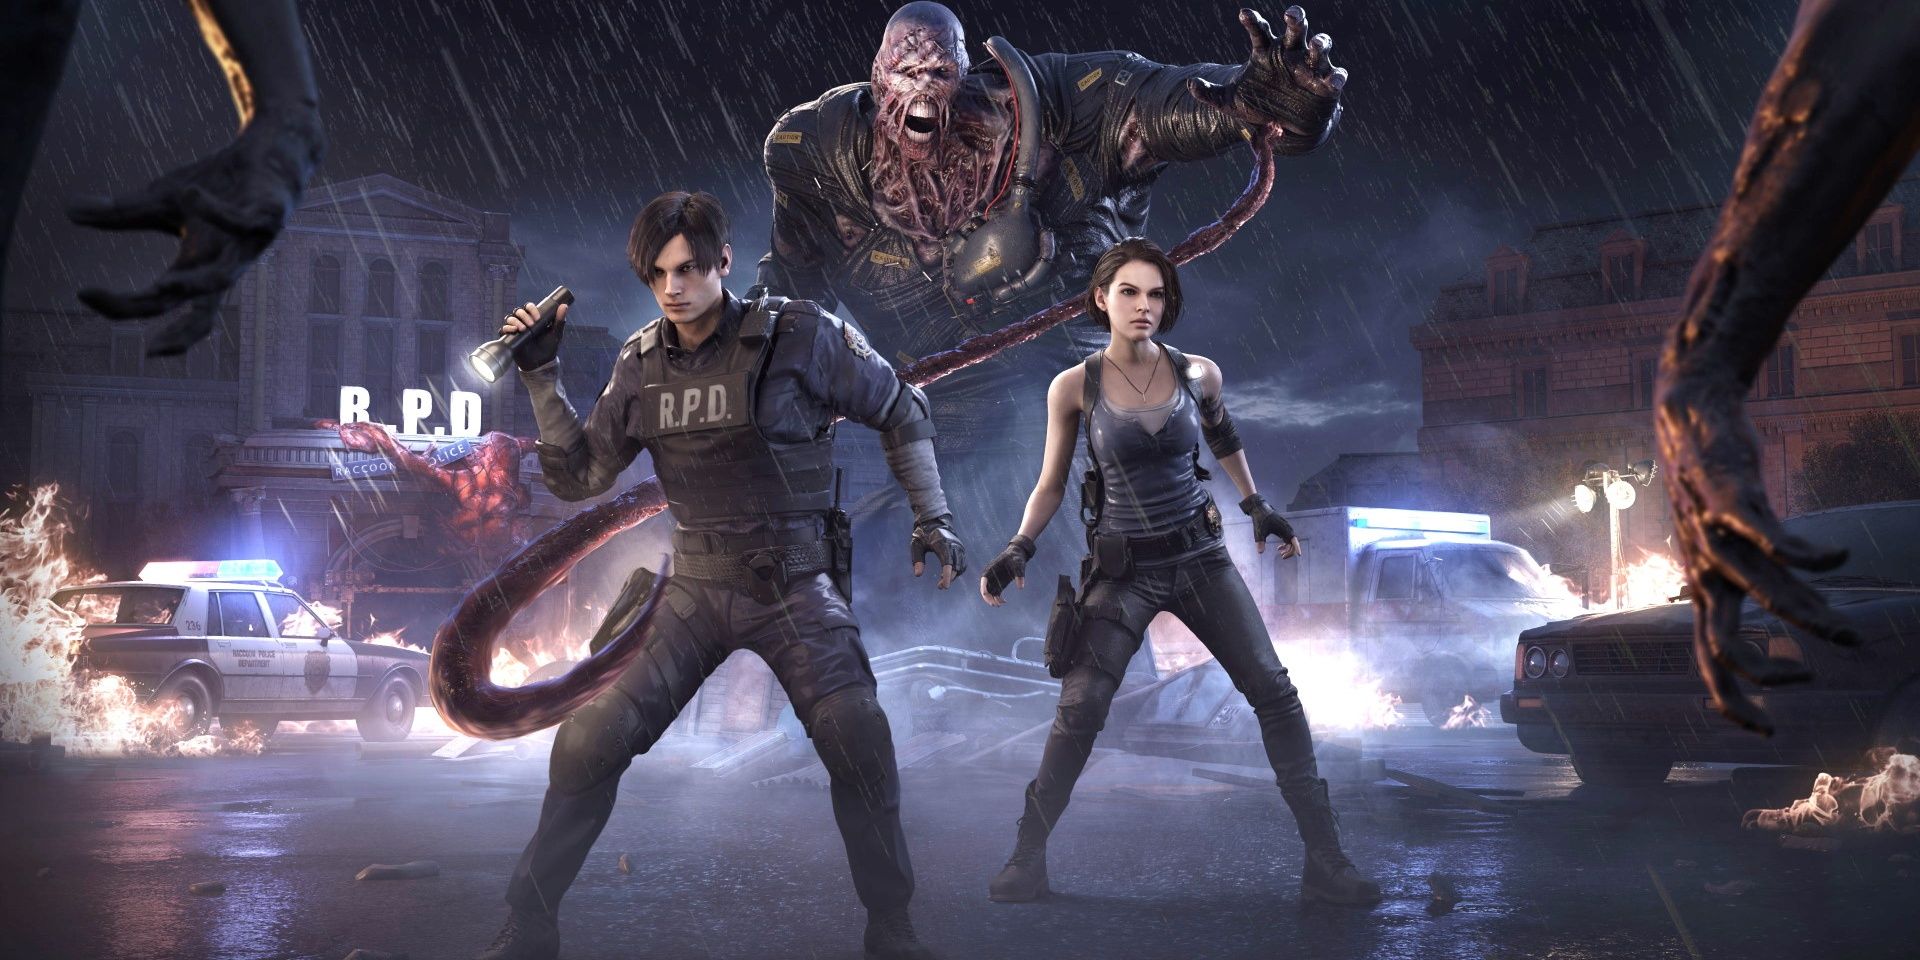 Leon Kennedy and Jill Valentine in front of Nemesis in Dead by Daylight